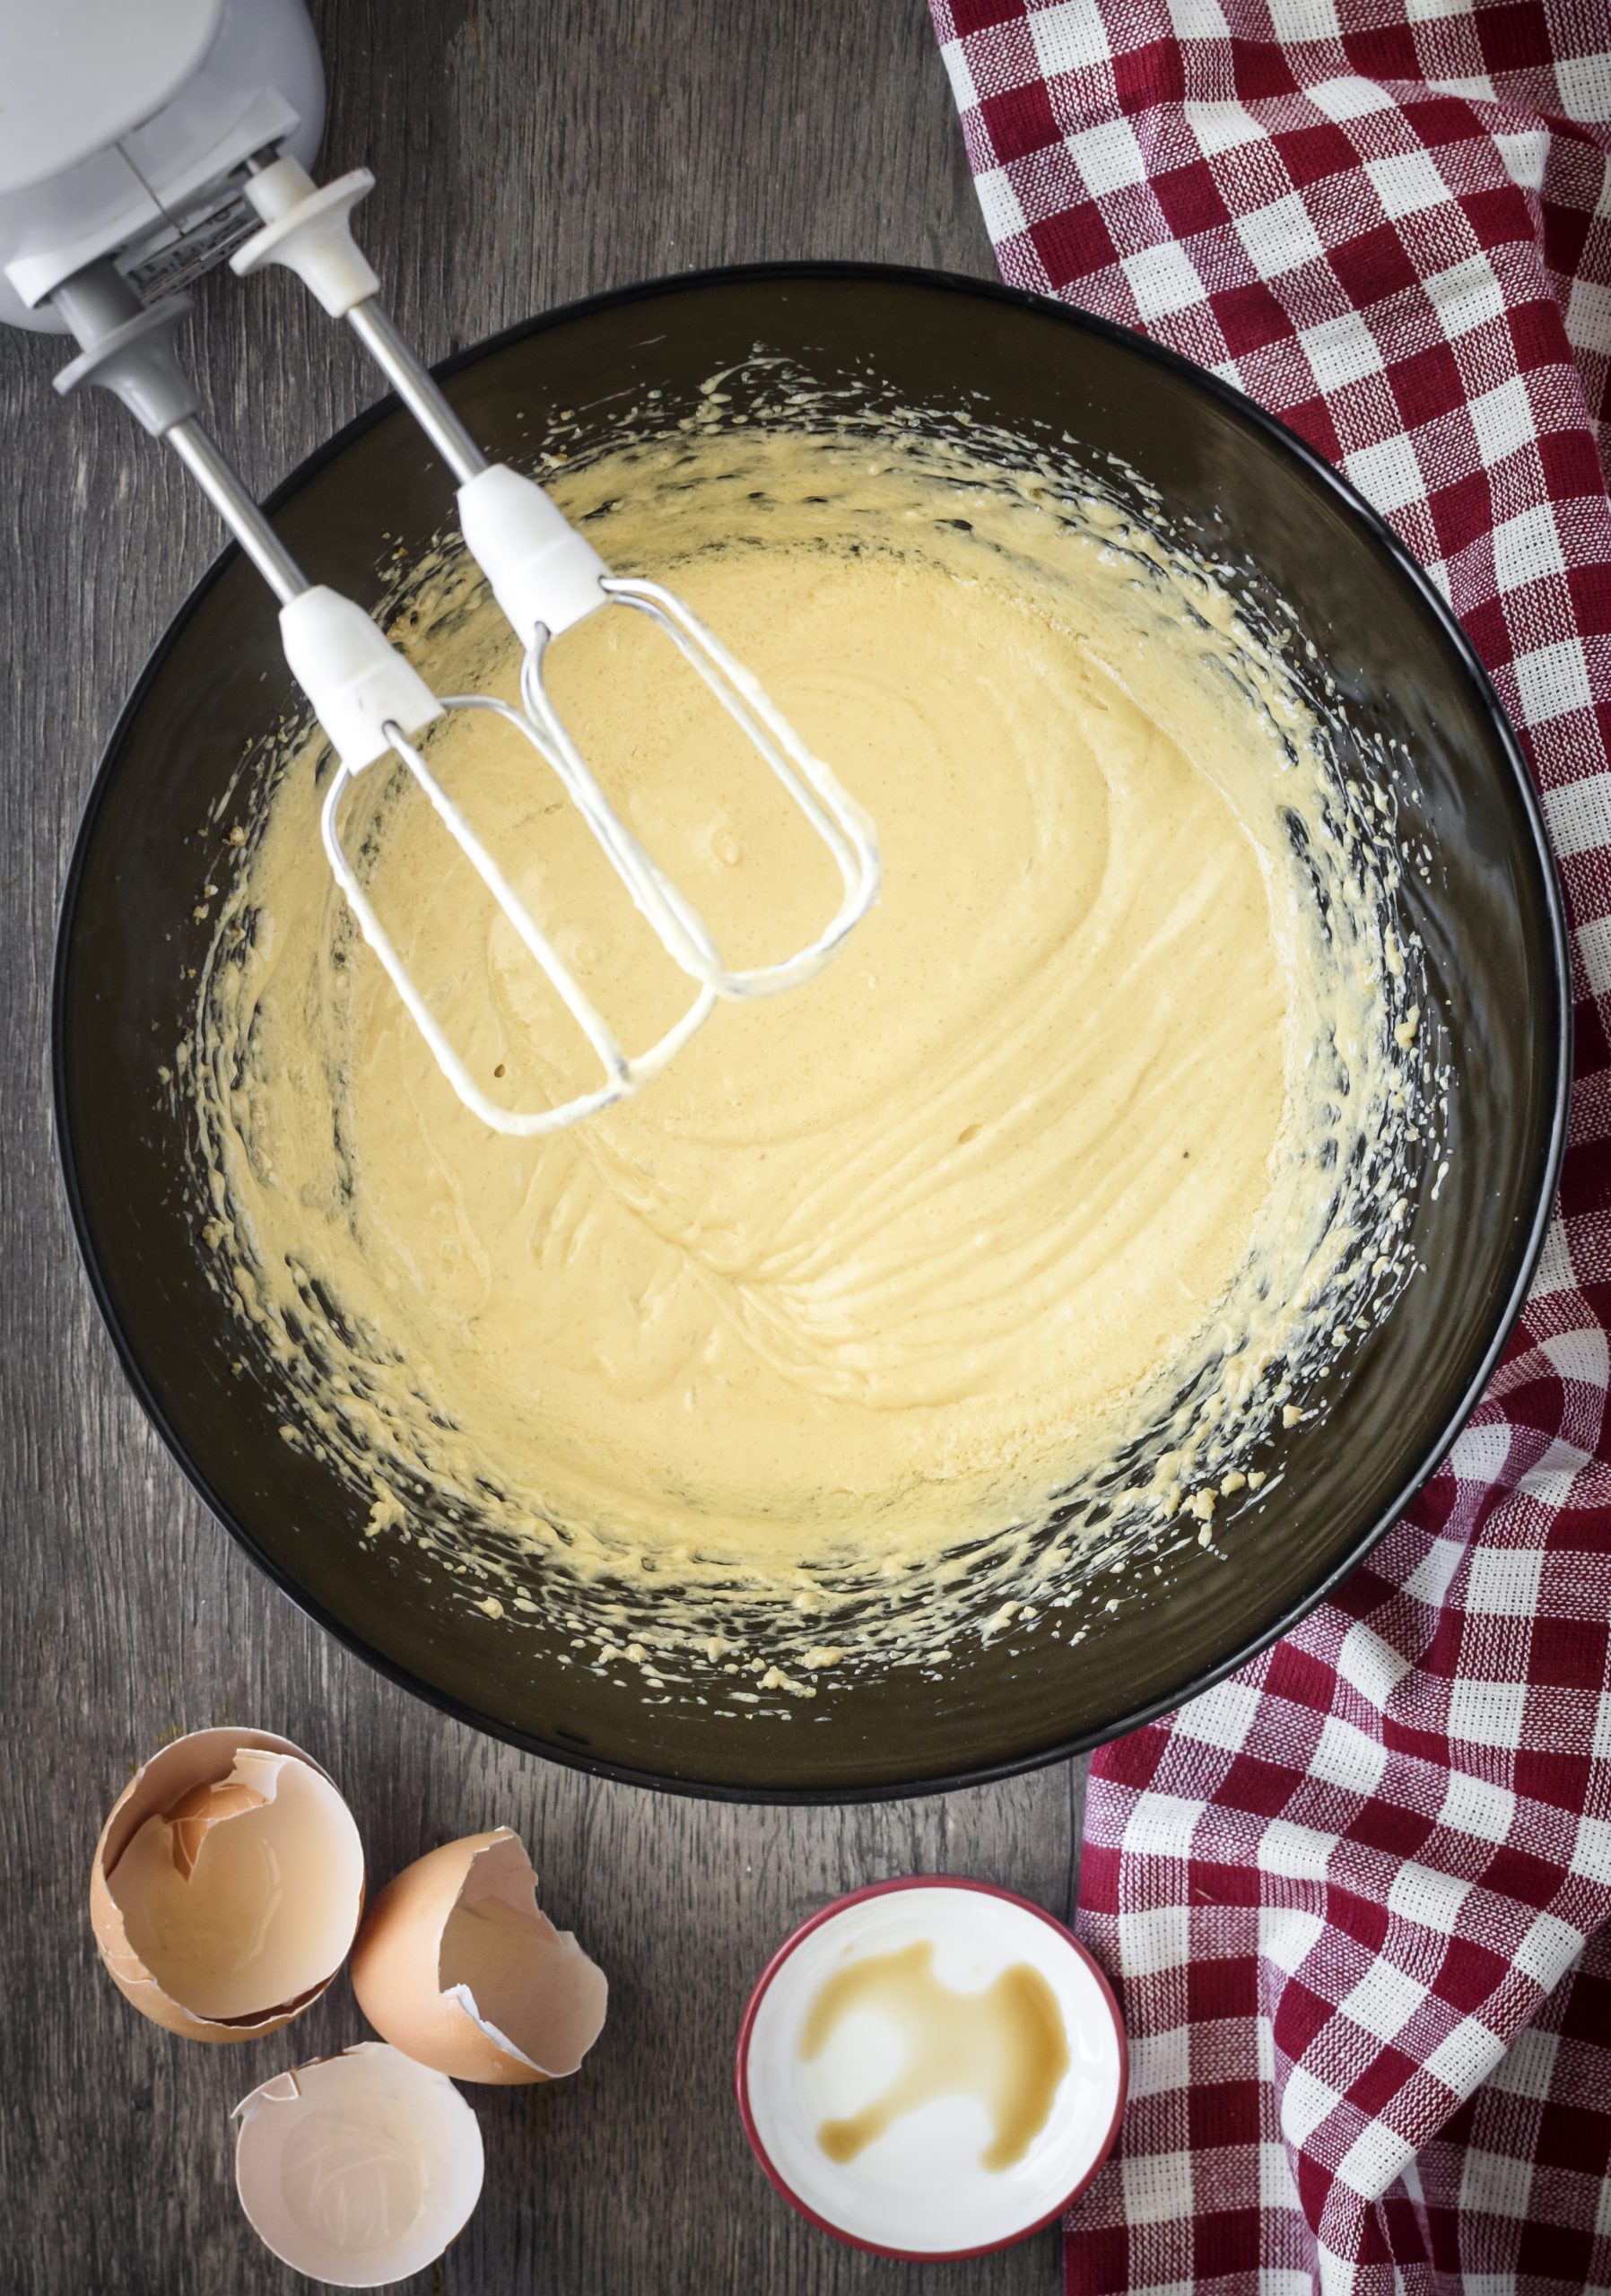 Add the vanilla extract and eggs to the mixing bowl, and blend until smooth. 